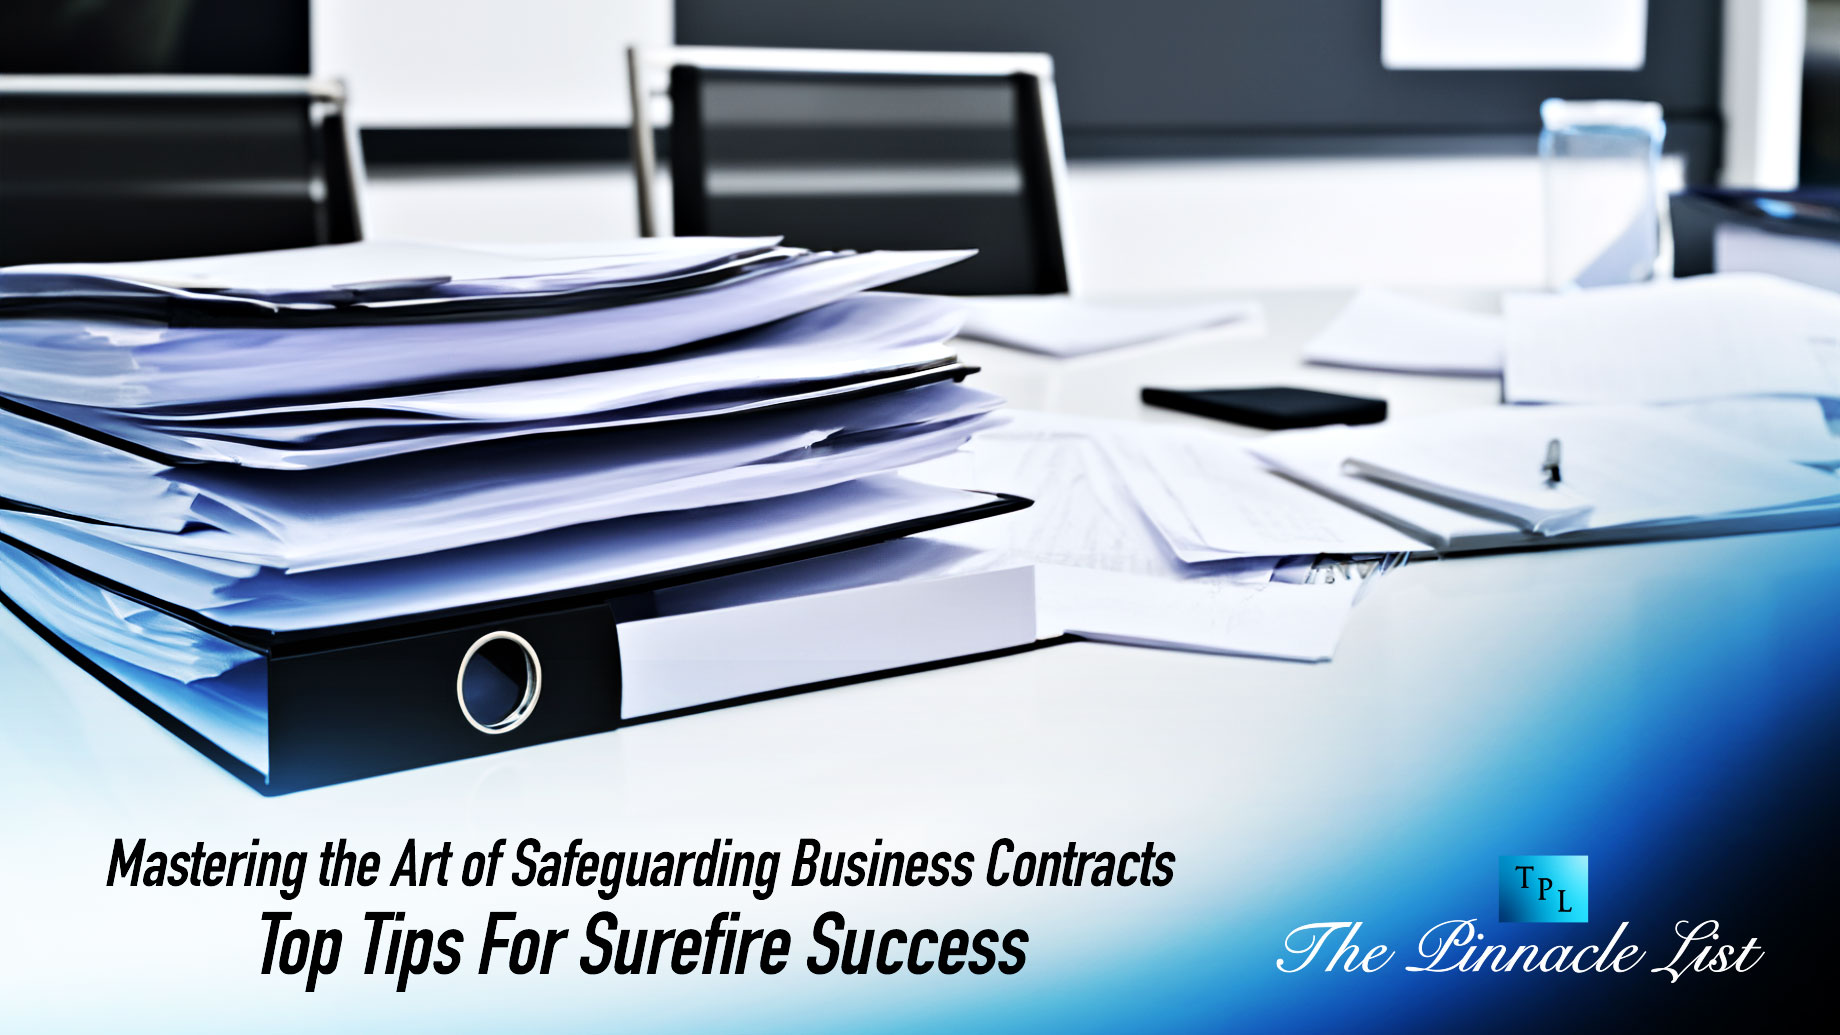 Mastering the Art of Safeguarding Business Contracts: Top Tips For Surefire Success